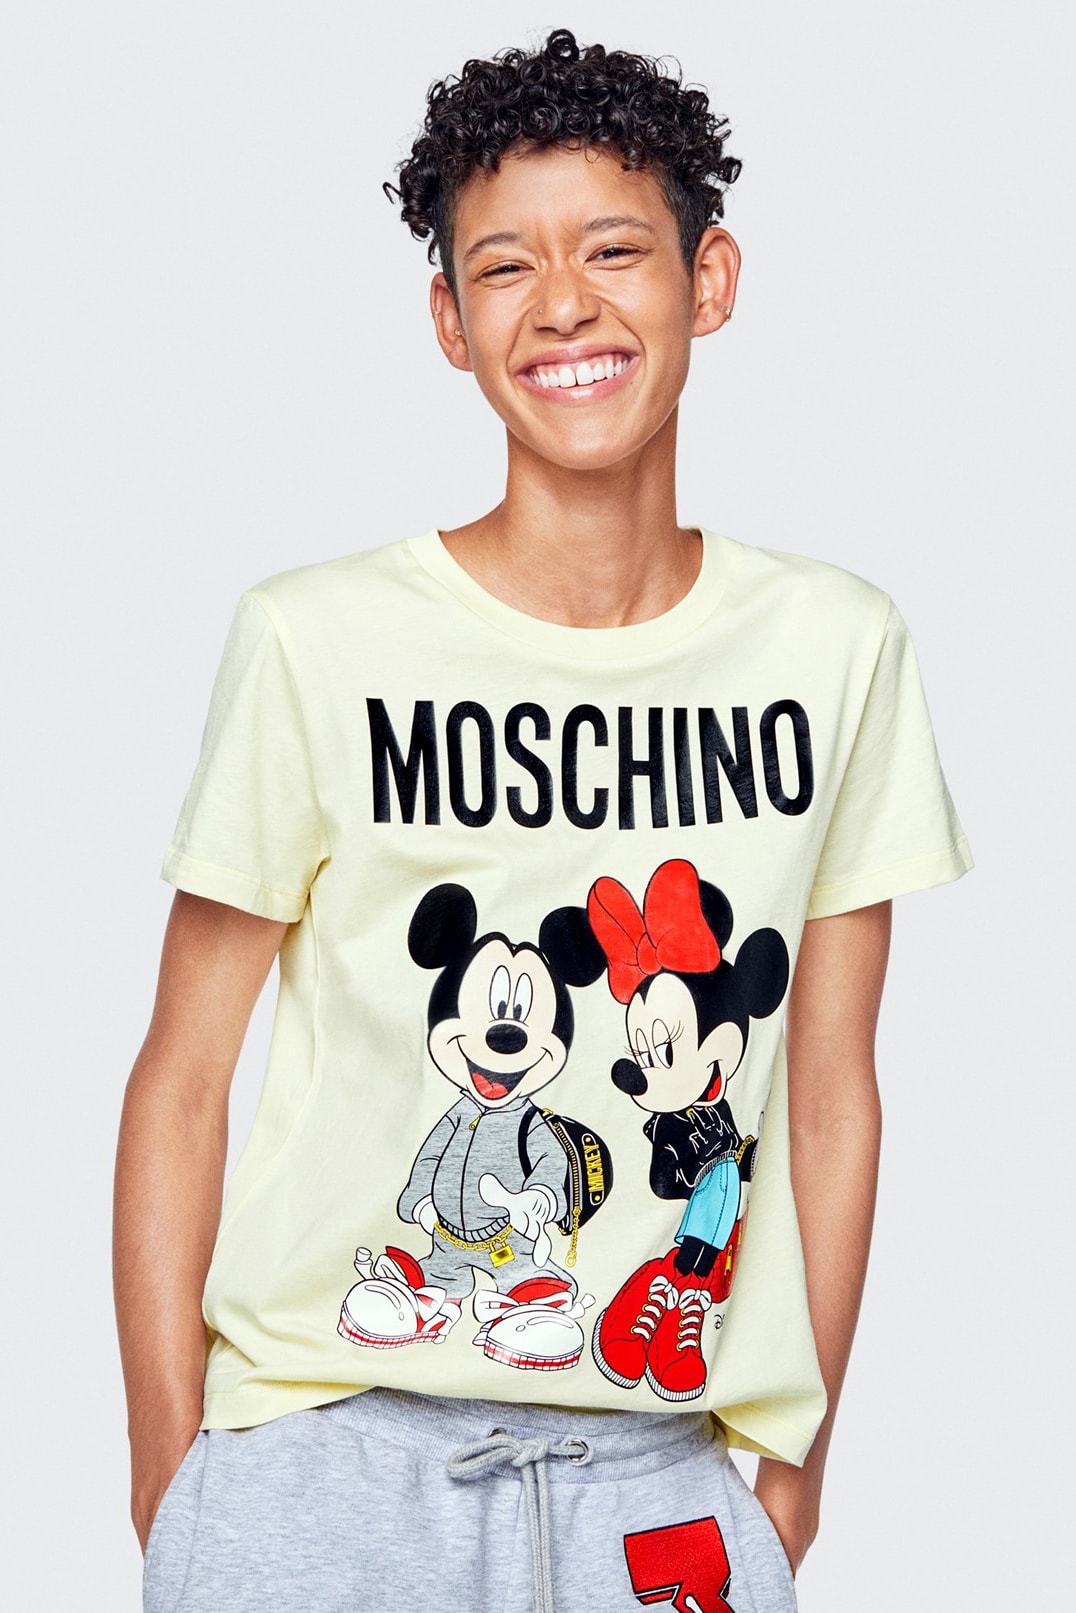 Moschino H&M Collection Lookbook Janice Dilon Minnie Mickey Mouse Shirt Yellow